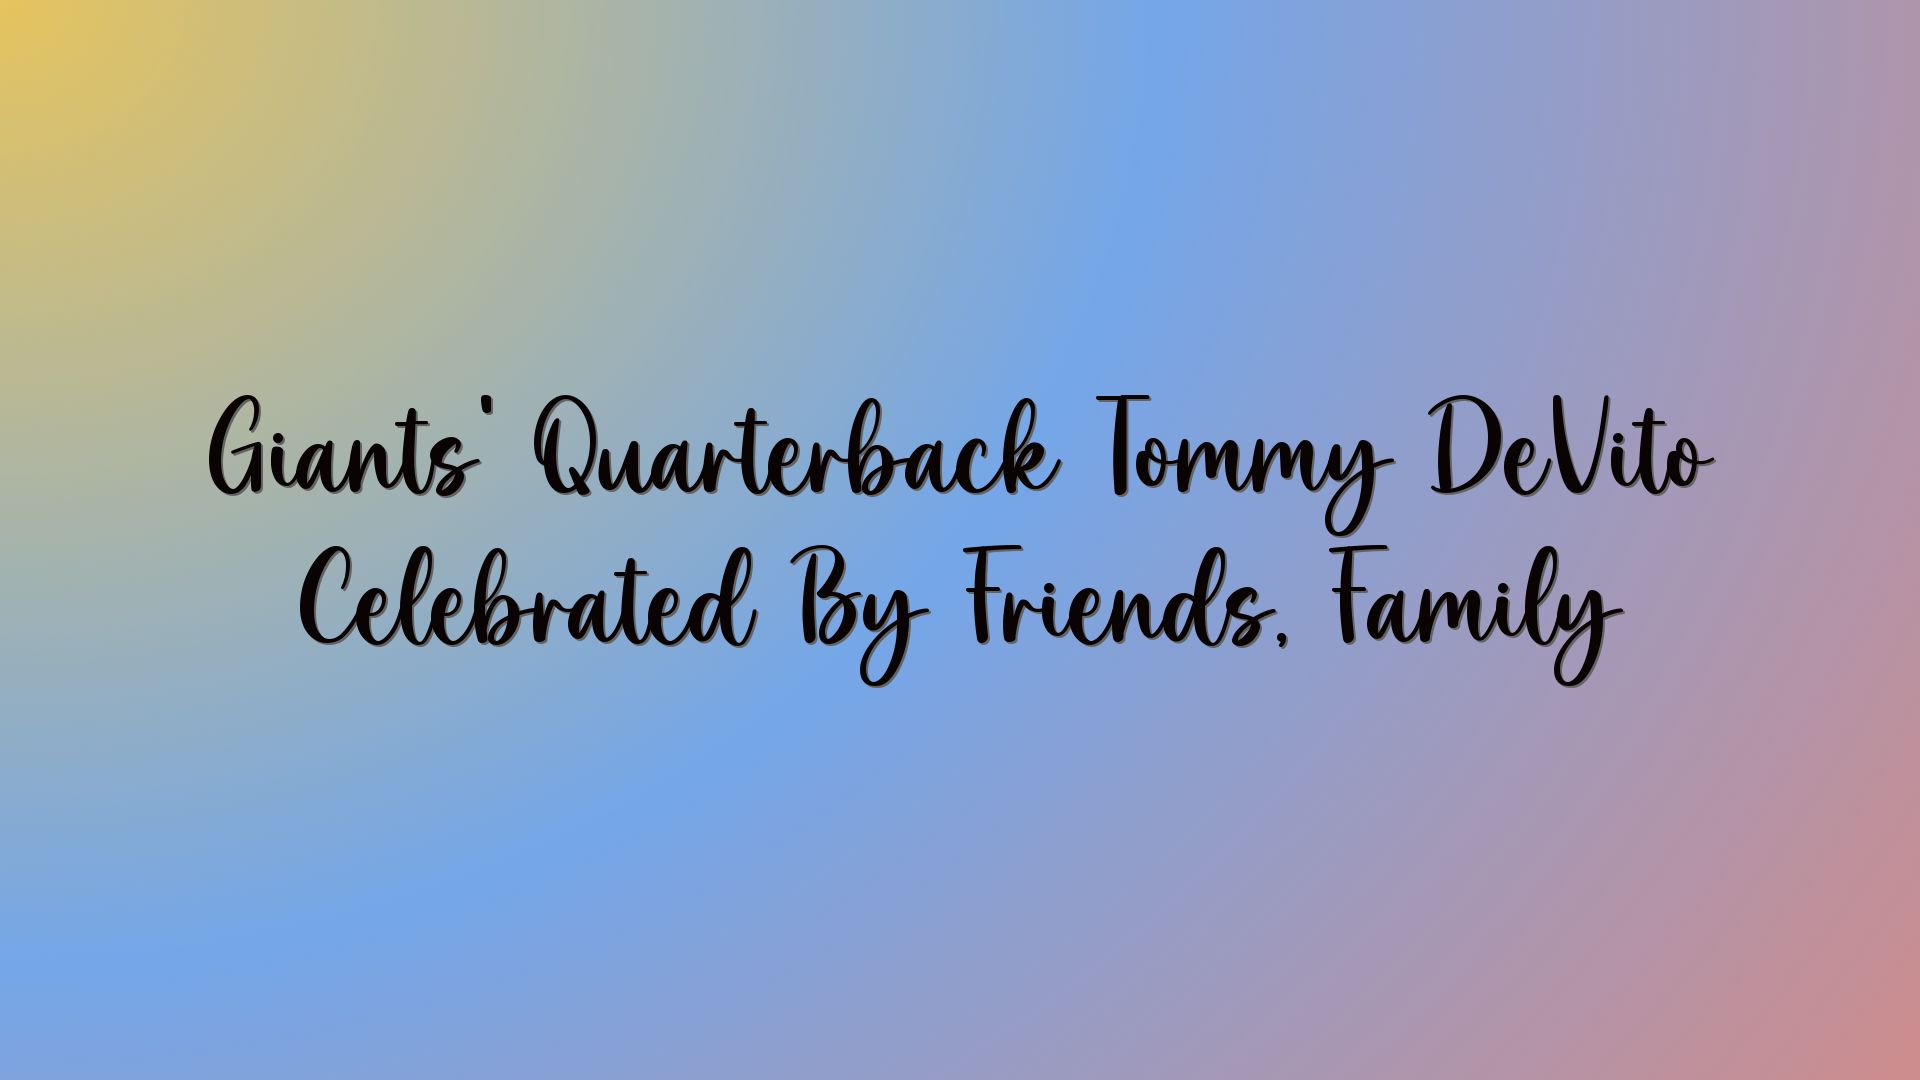 Giants’ Quarterback Tommy DeVito Celebrated By Friends, Family